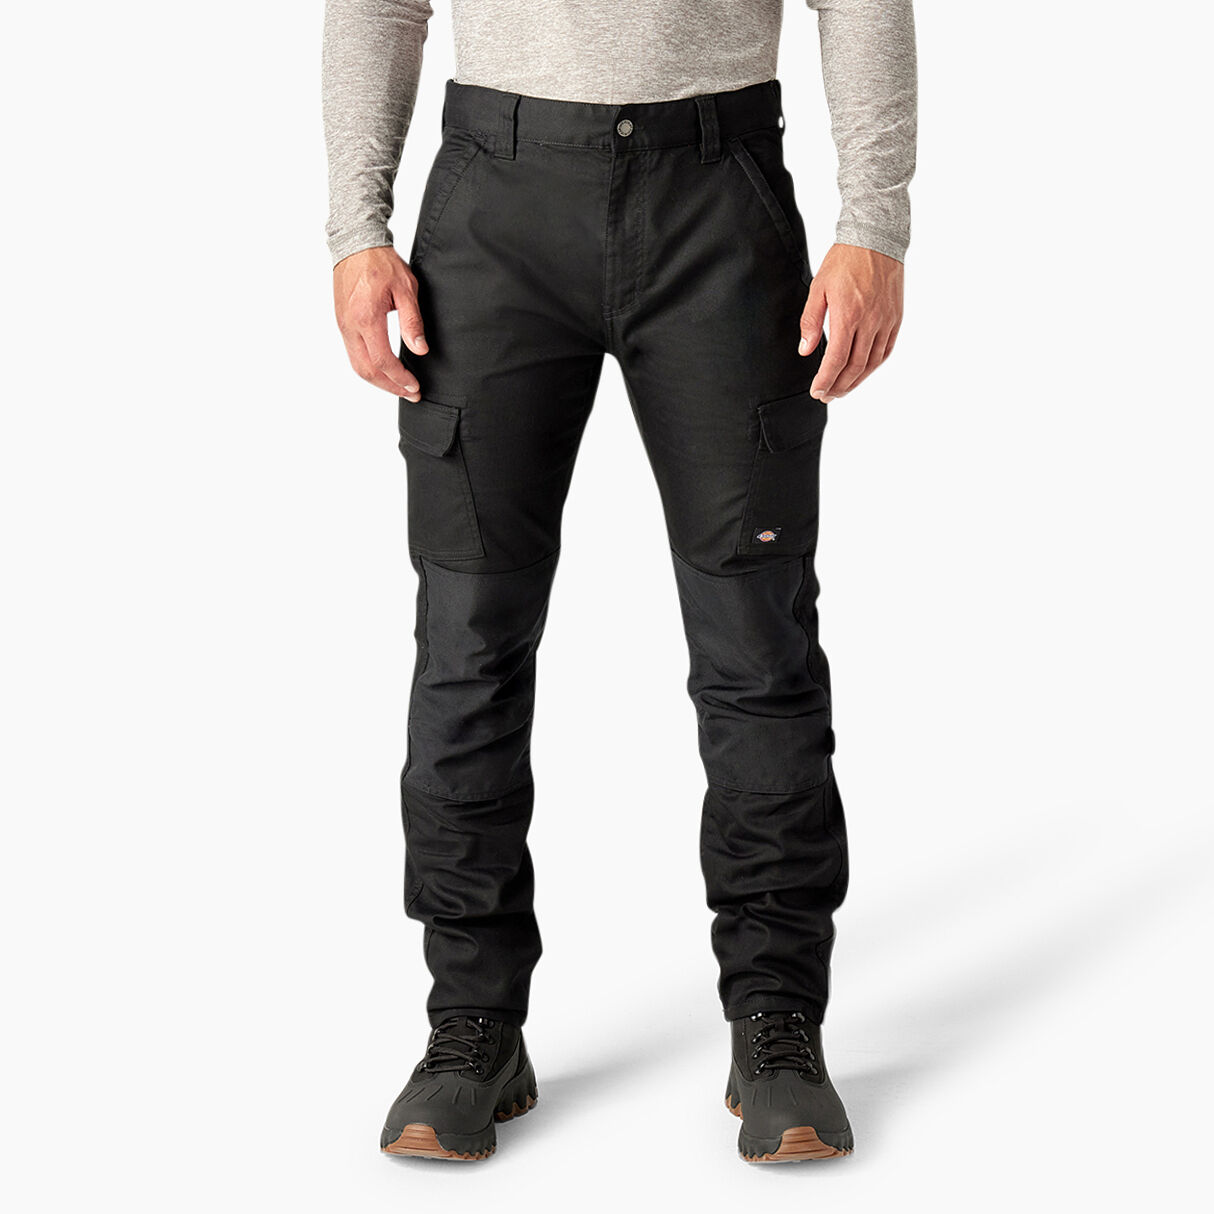 Temp-iQ® 365 Regular Fit Double Knee Tapered Duck Pants - Dickies